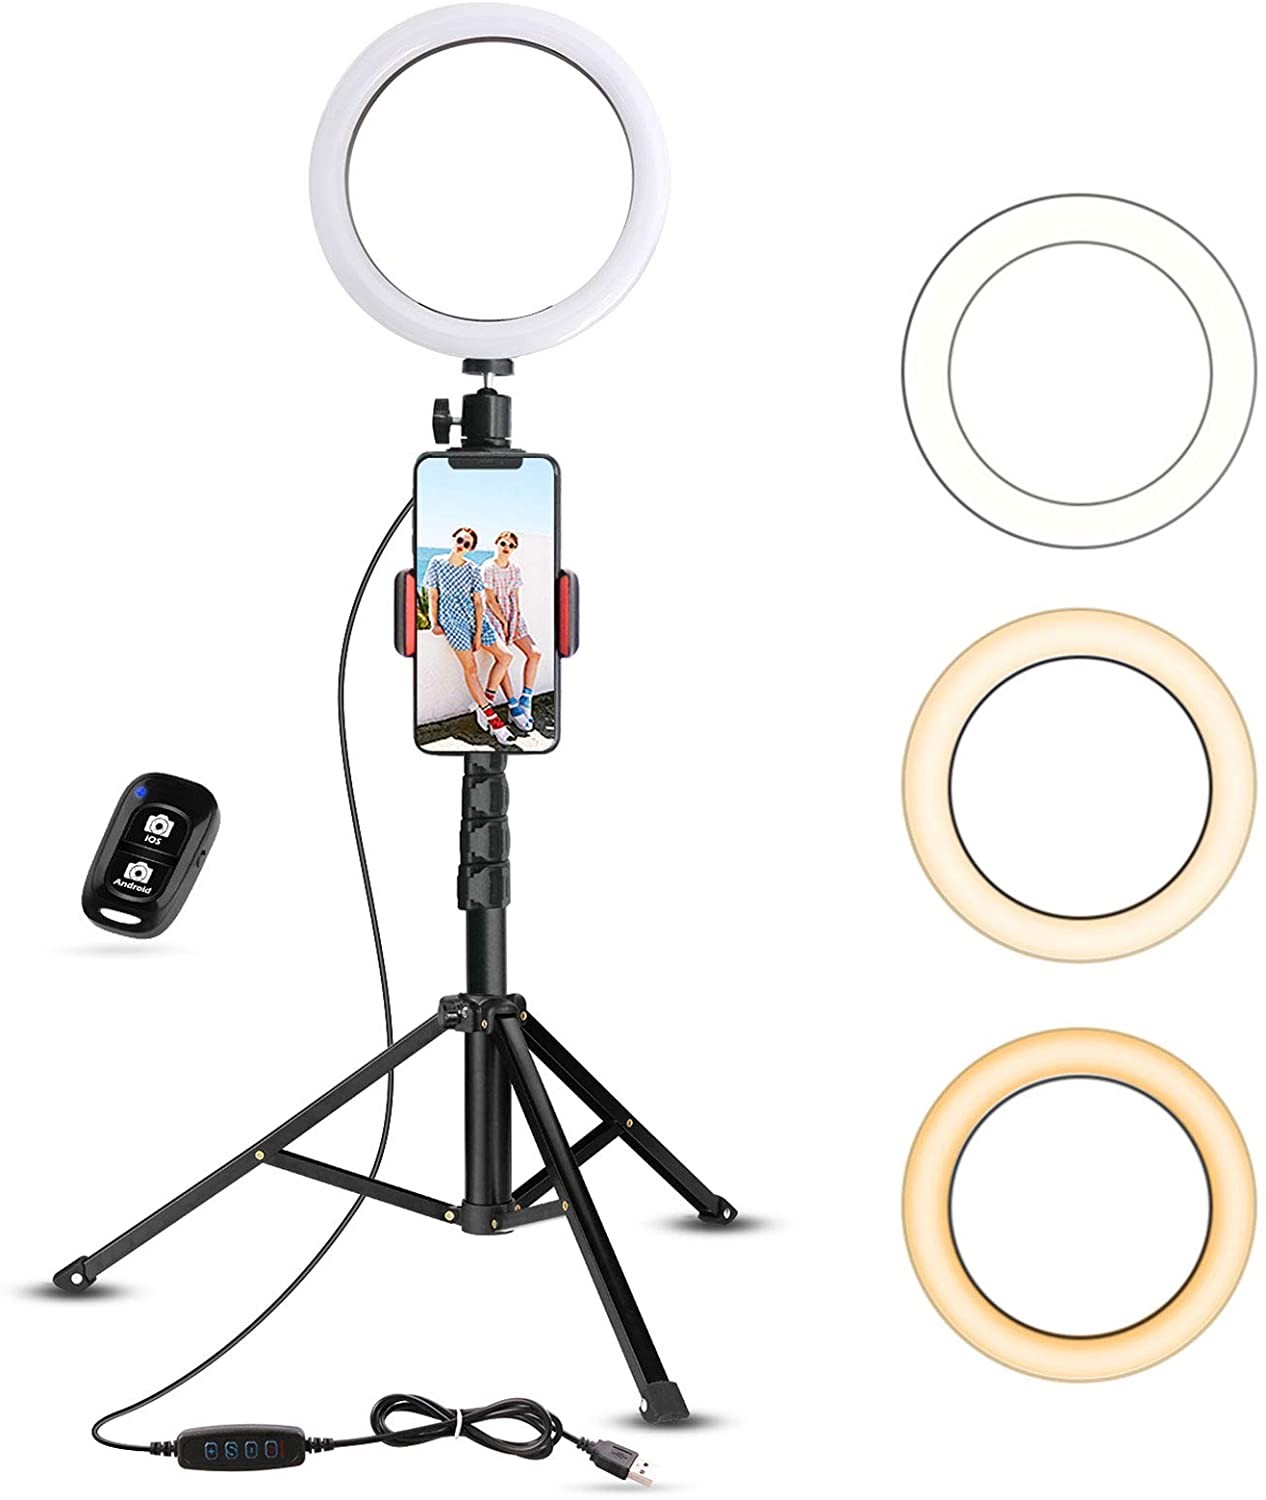 ubeesize ring lights review